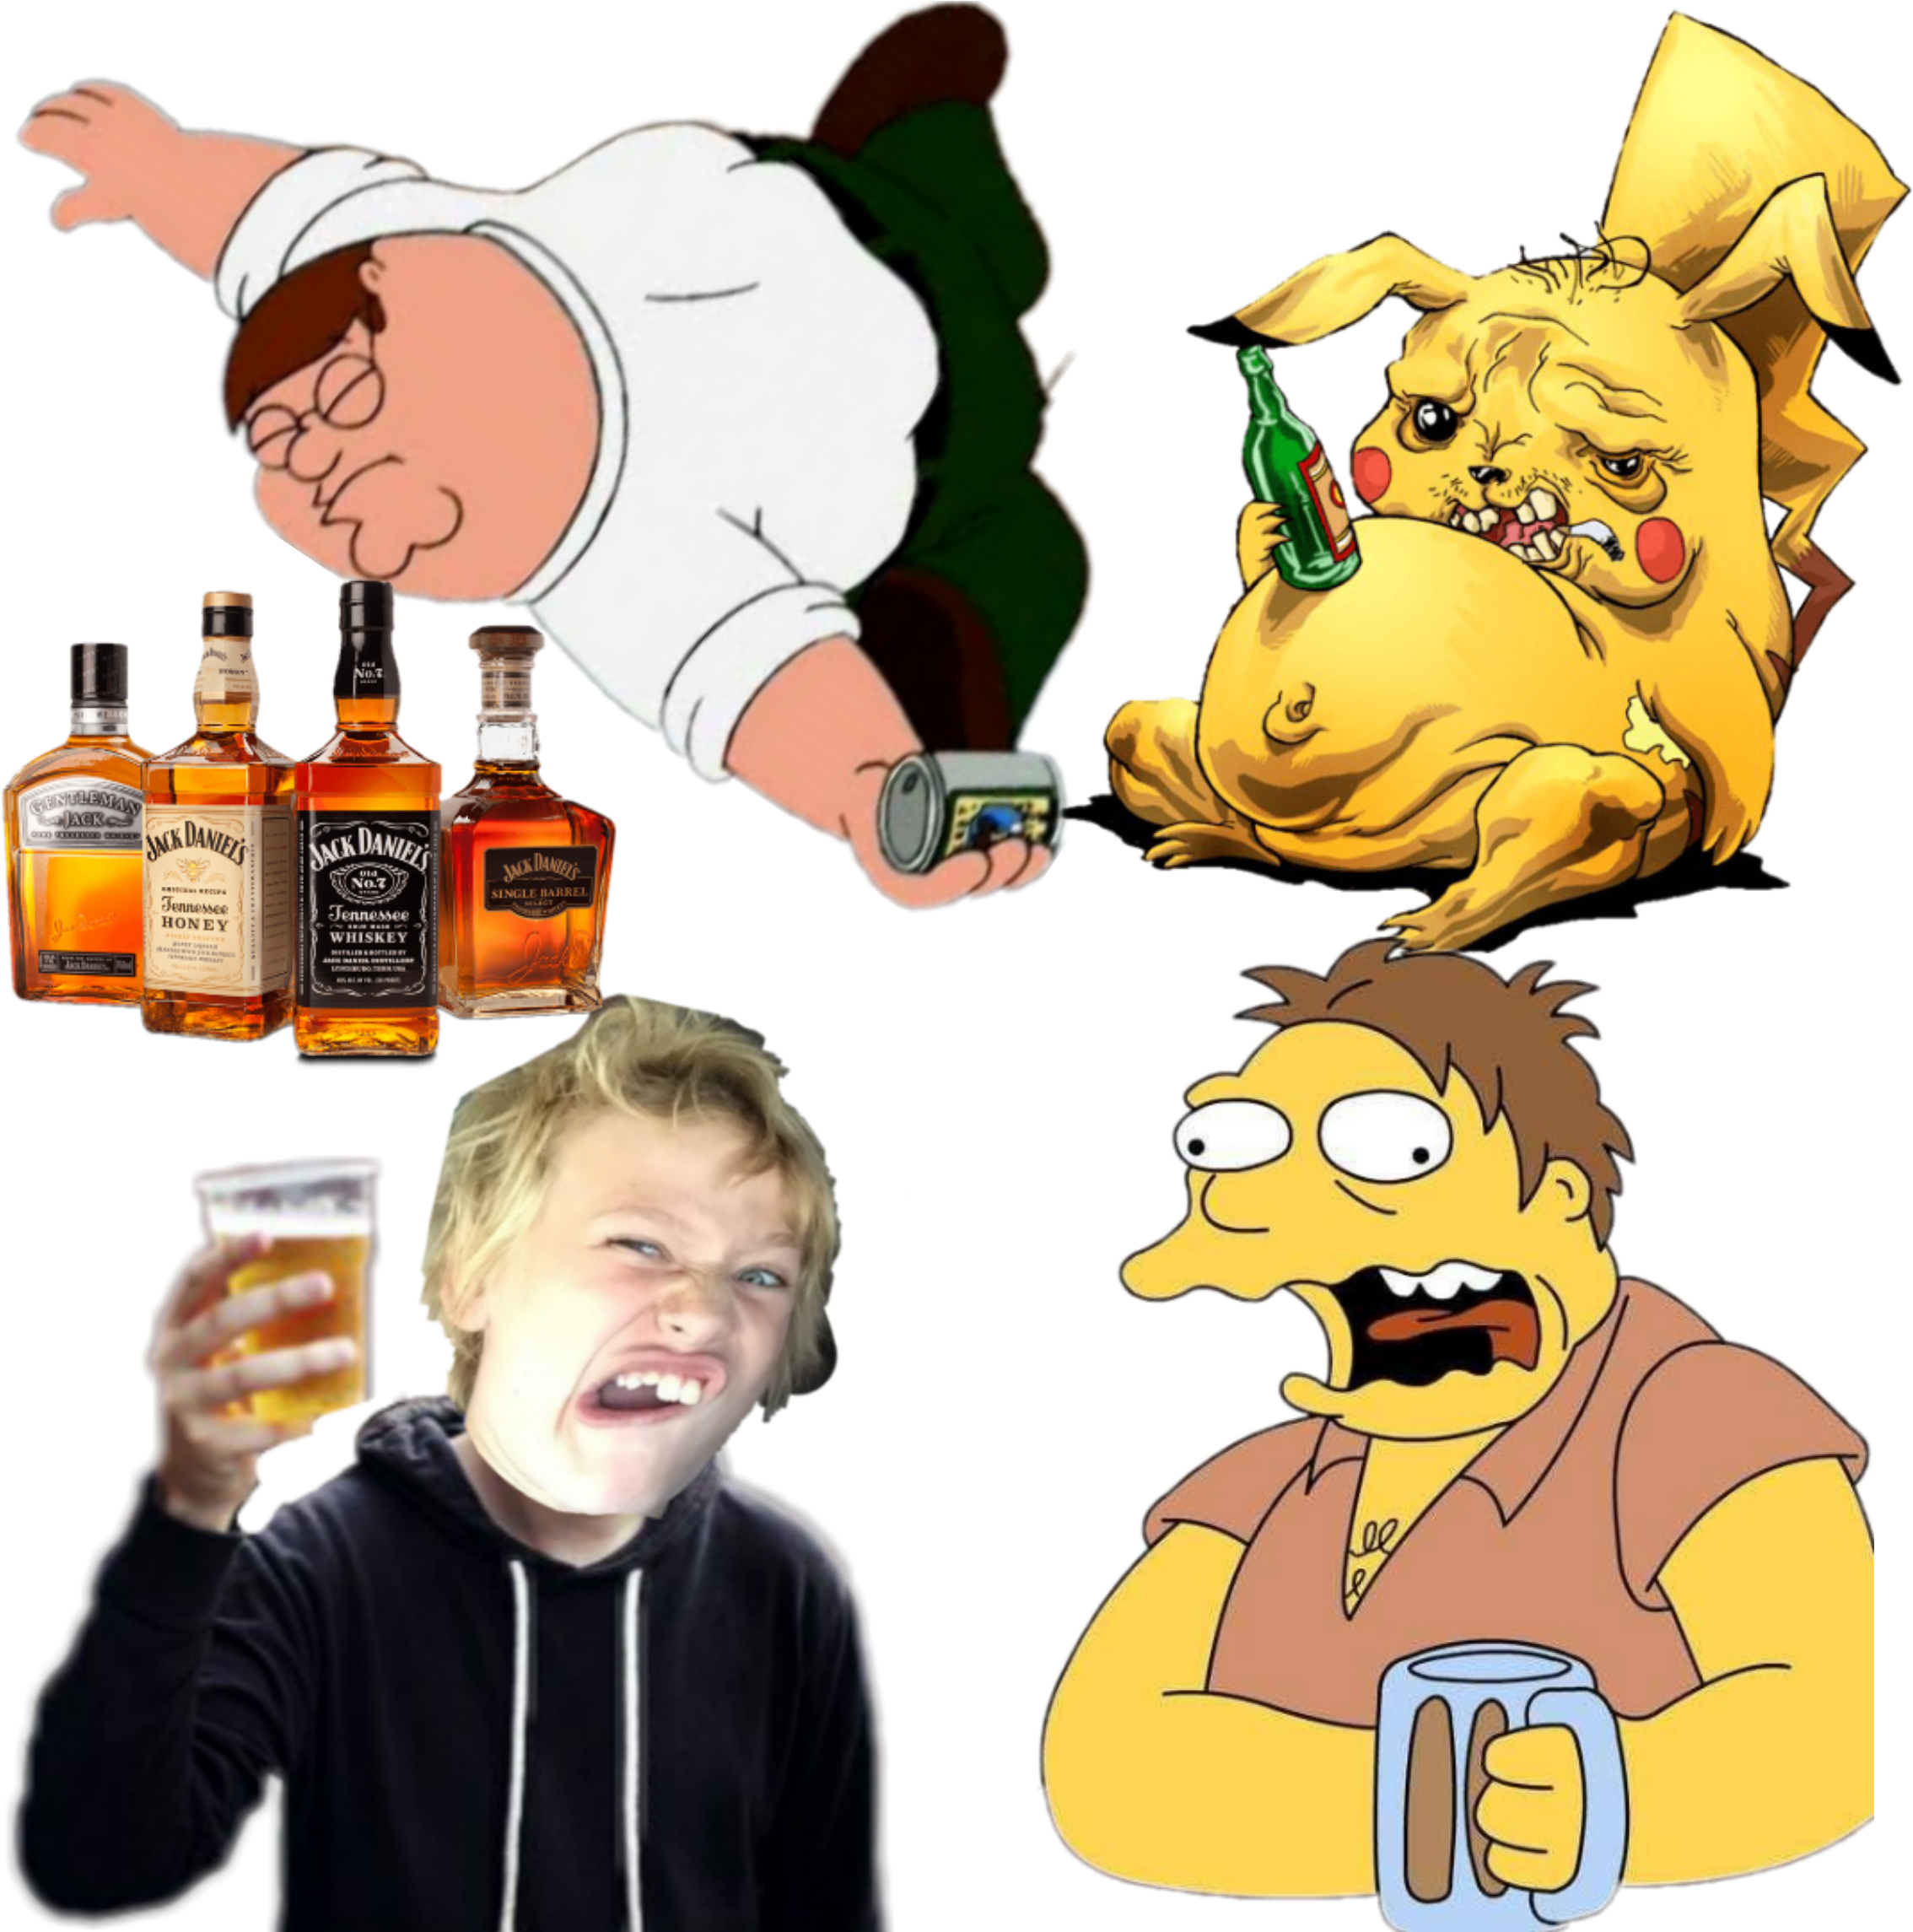 Intoxicated Cartoon Characters Collage